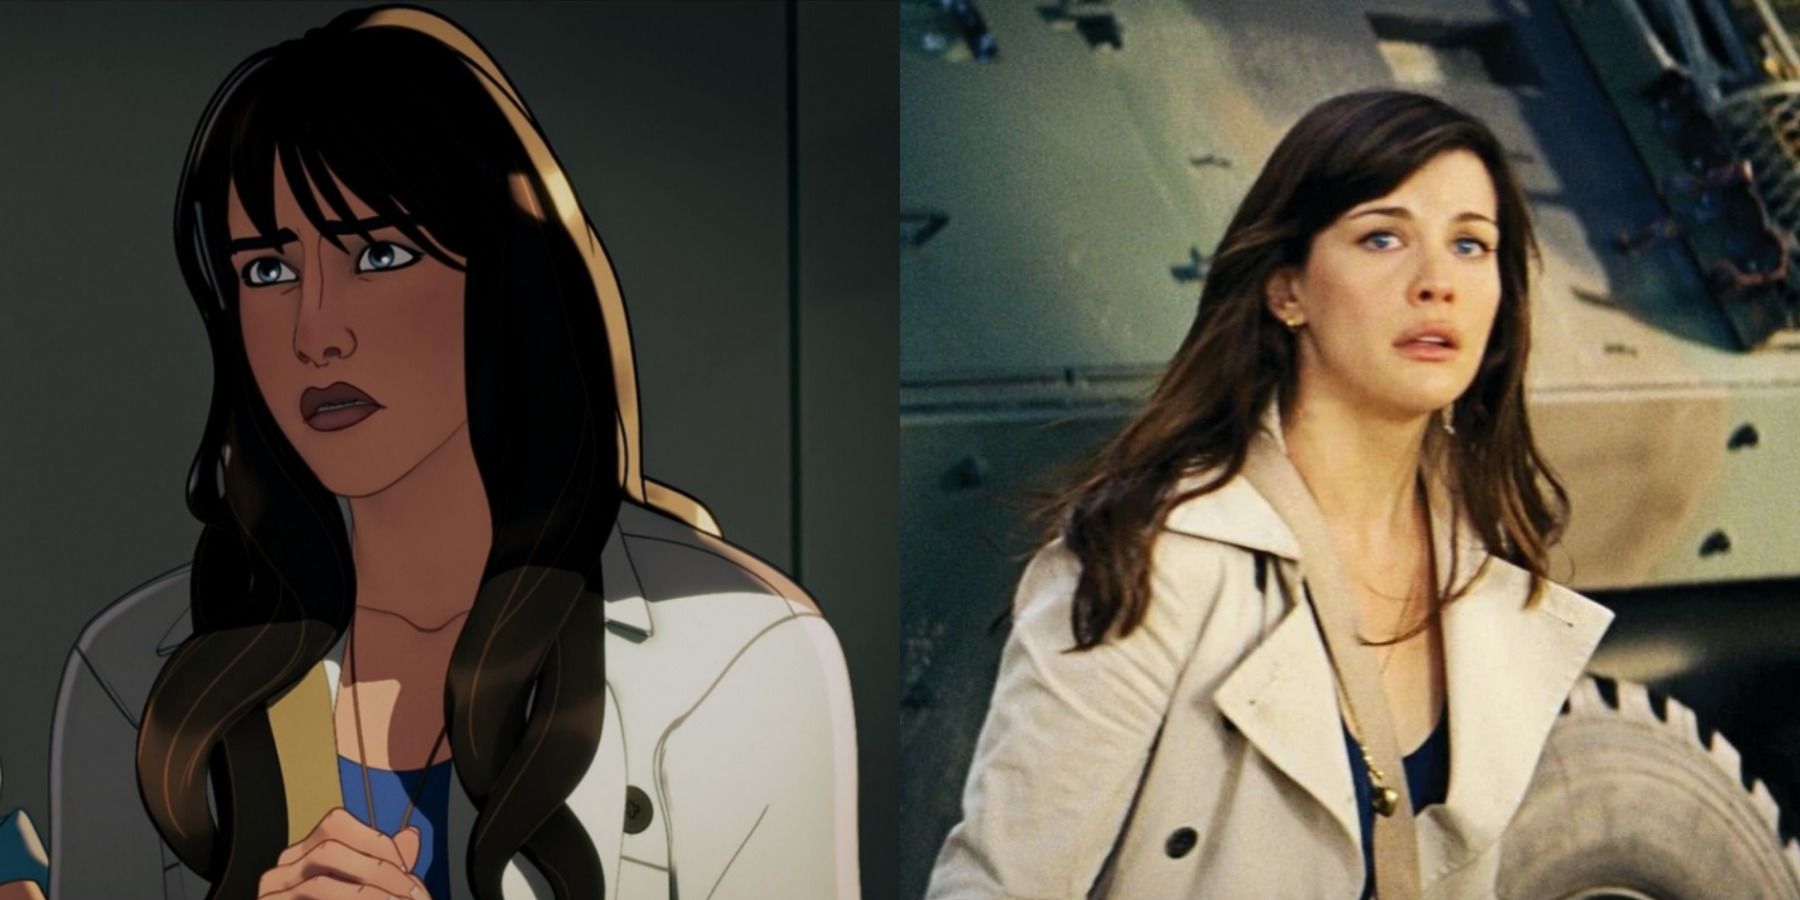 A split image depicts Betty Ross in What If Episode 3 and The Incredible Hulk